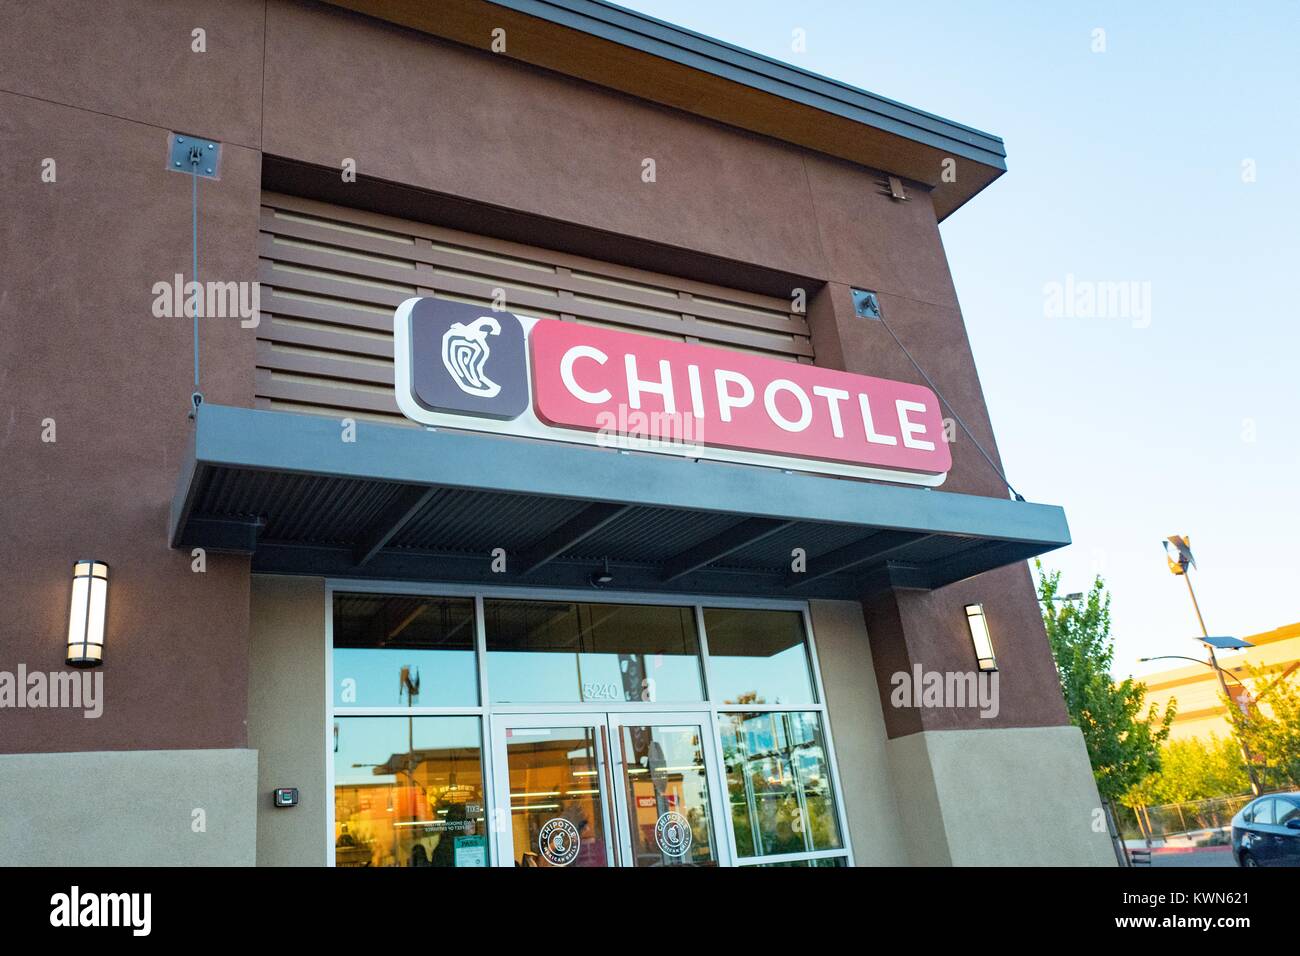 Facade with signage at a local franchise of the Chipotle chain of Mexican restaurants, Dublin, California, July 10, 2017. Stock Photo